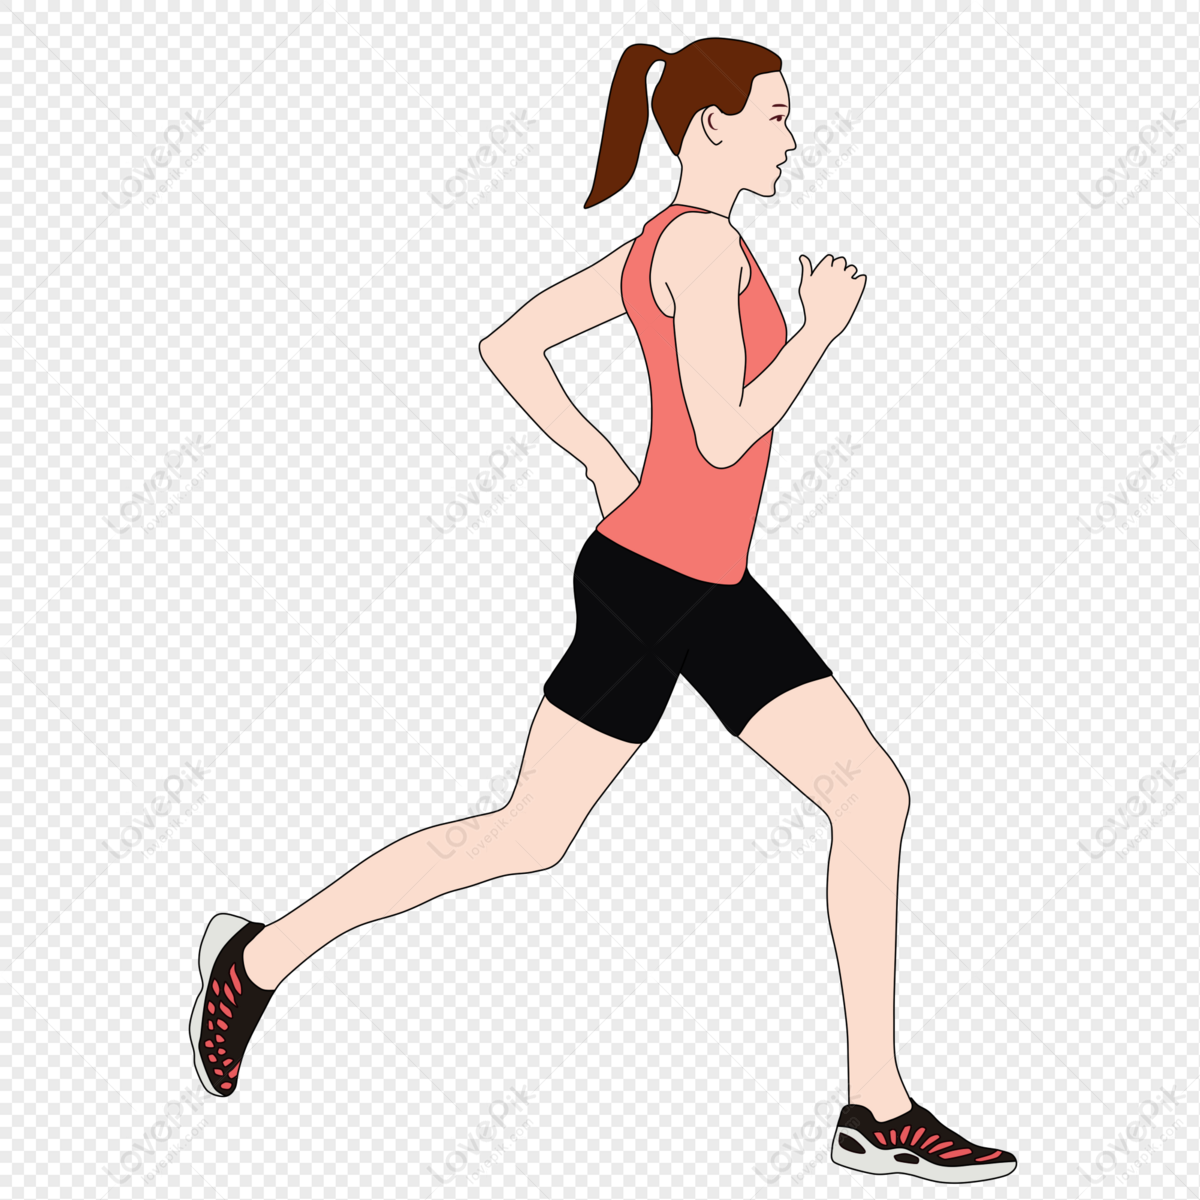 HD Running Girl Backgrounds Images,Cool Pictures Free Download 